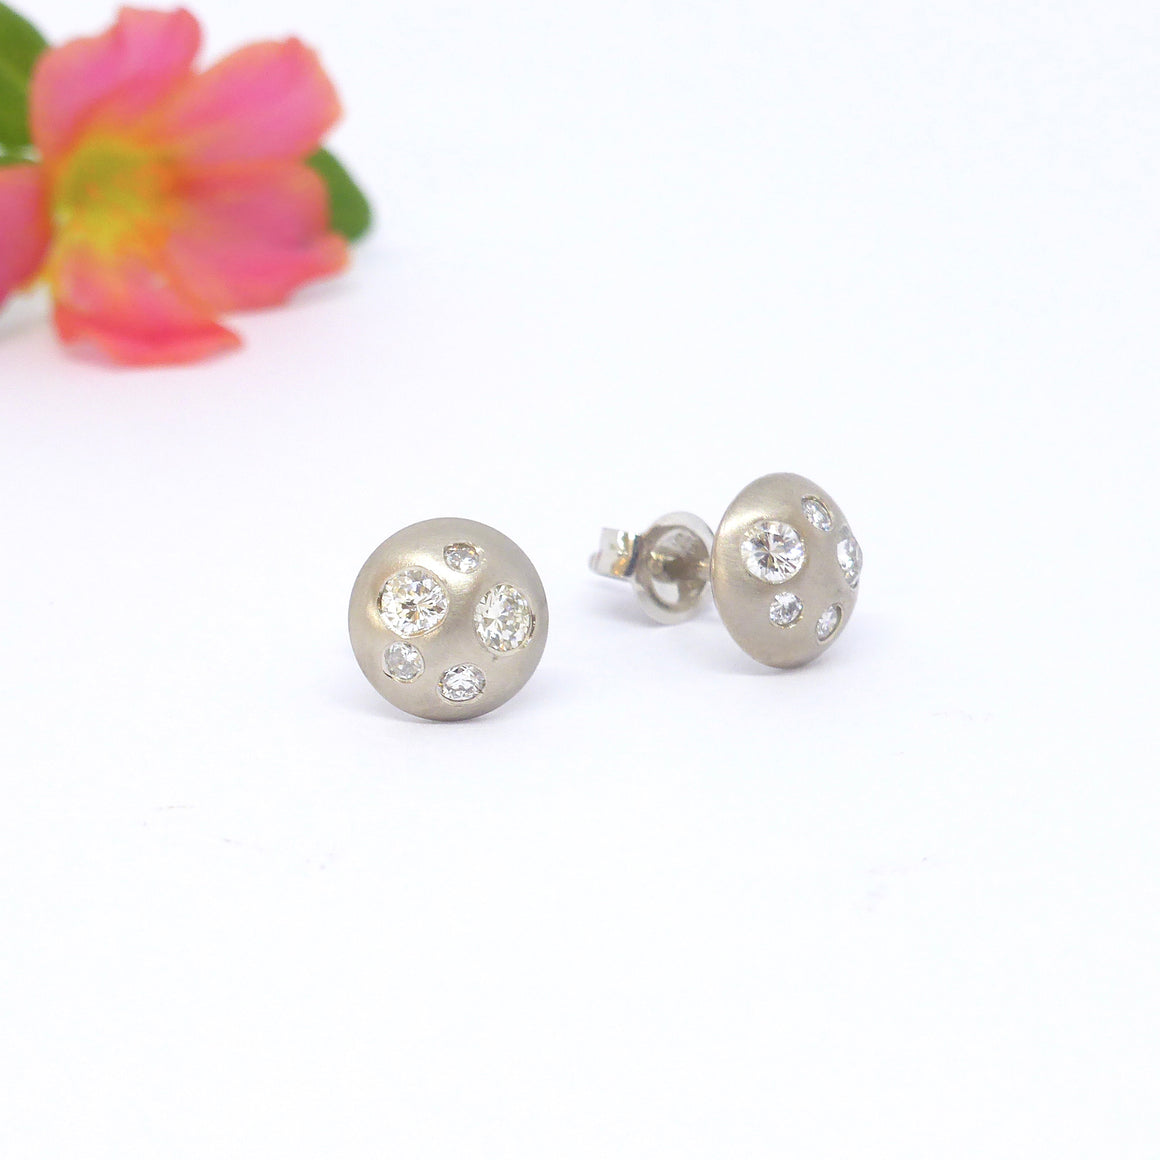 18ct white gold button stud earrings